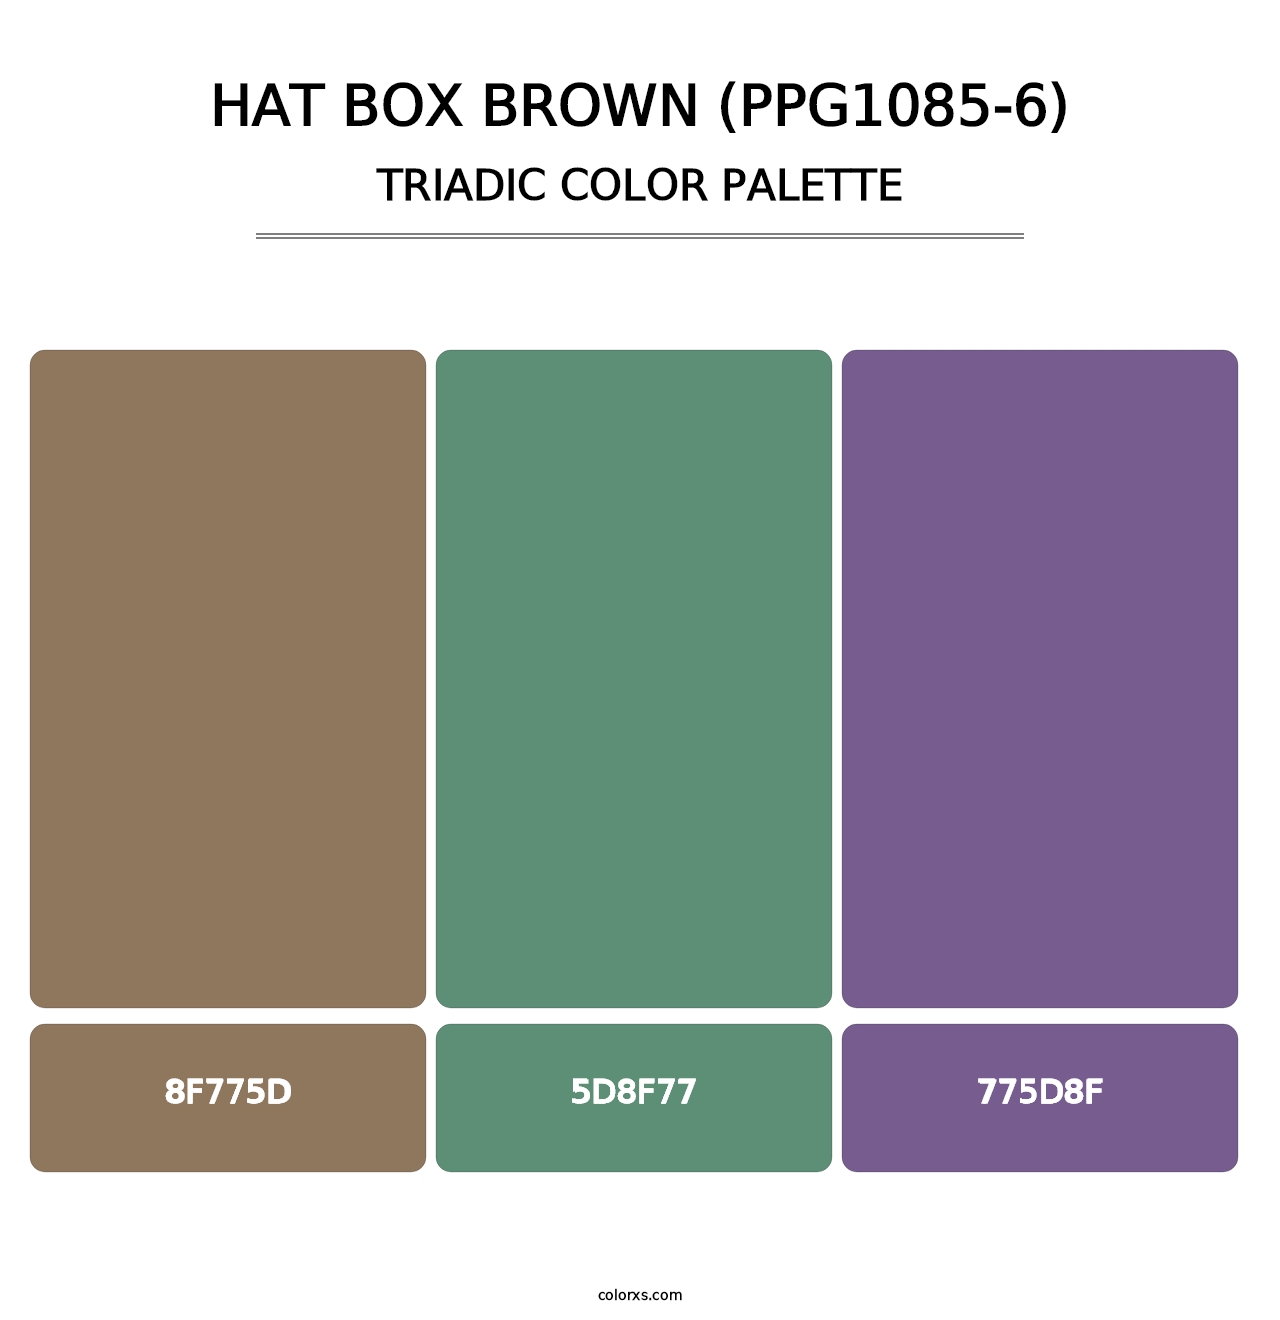 Hat Box Brown (PPG1085-6) - Triadic Color Palette